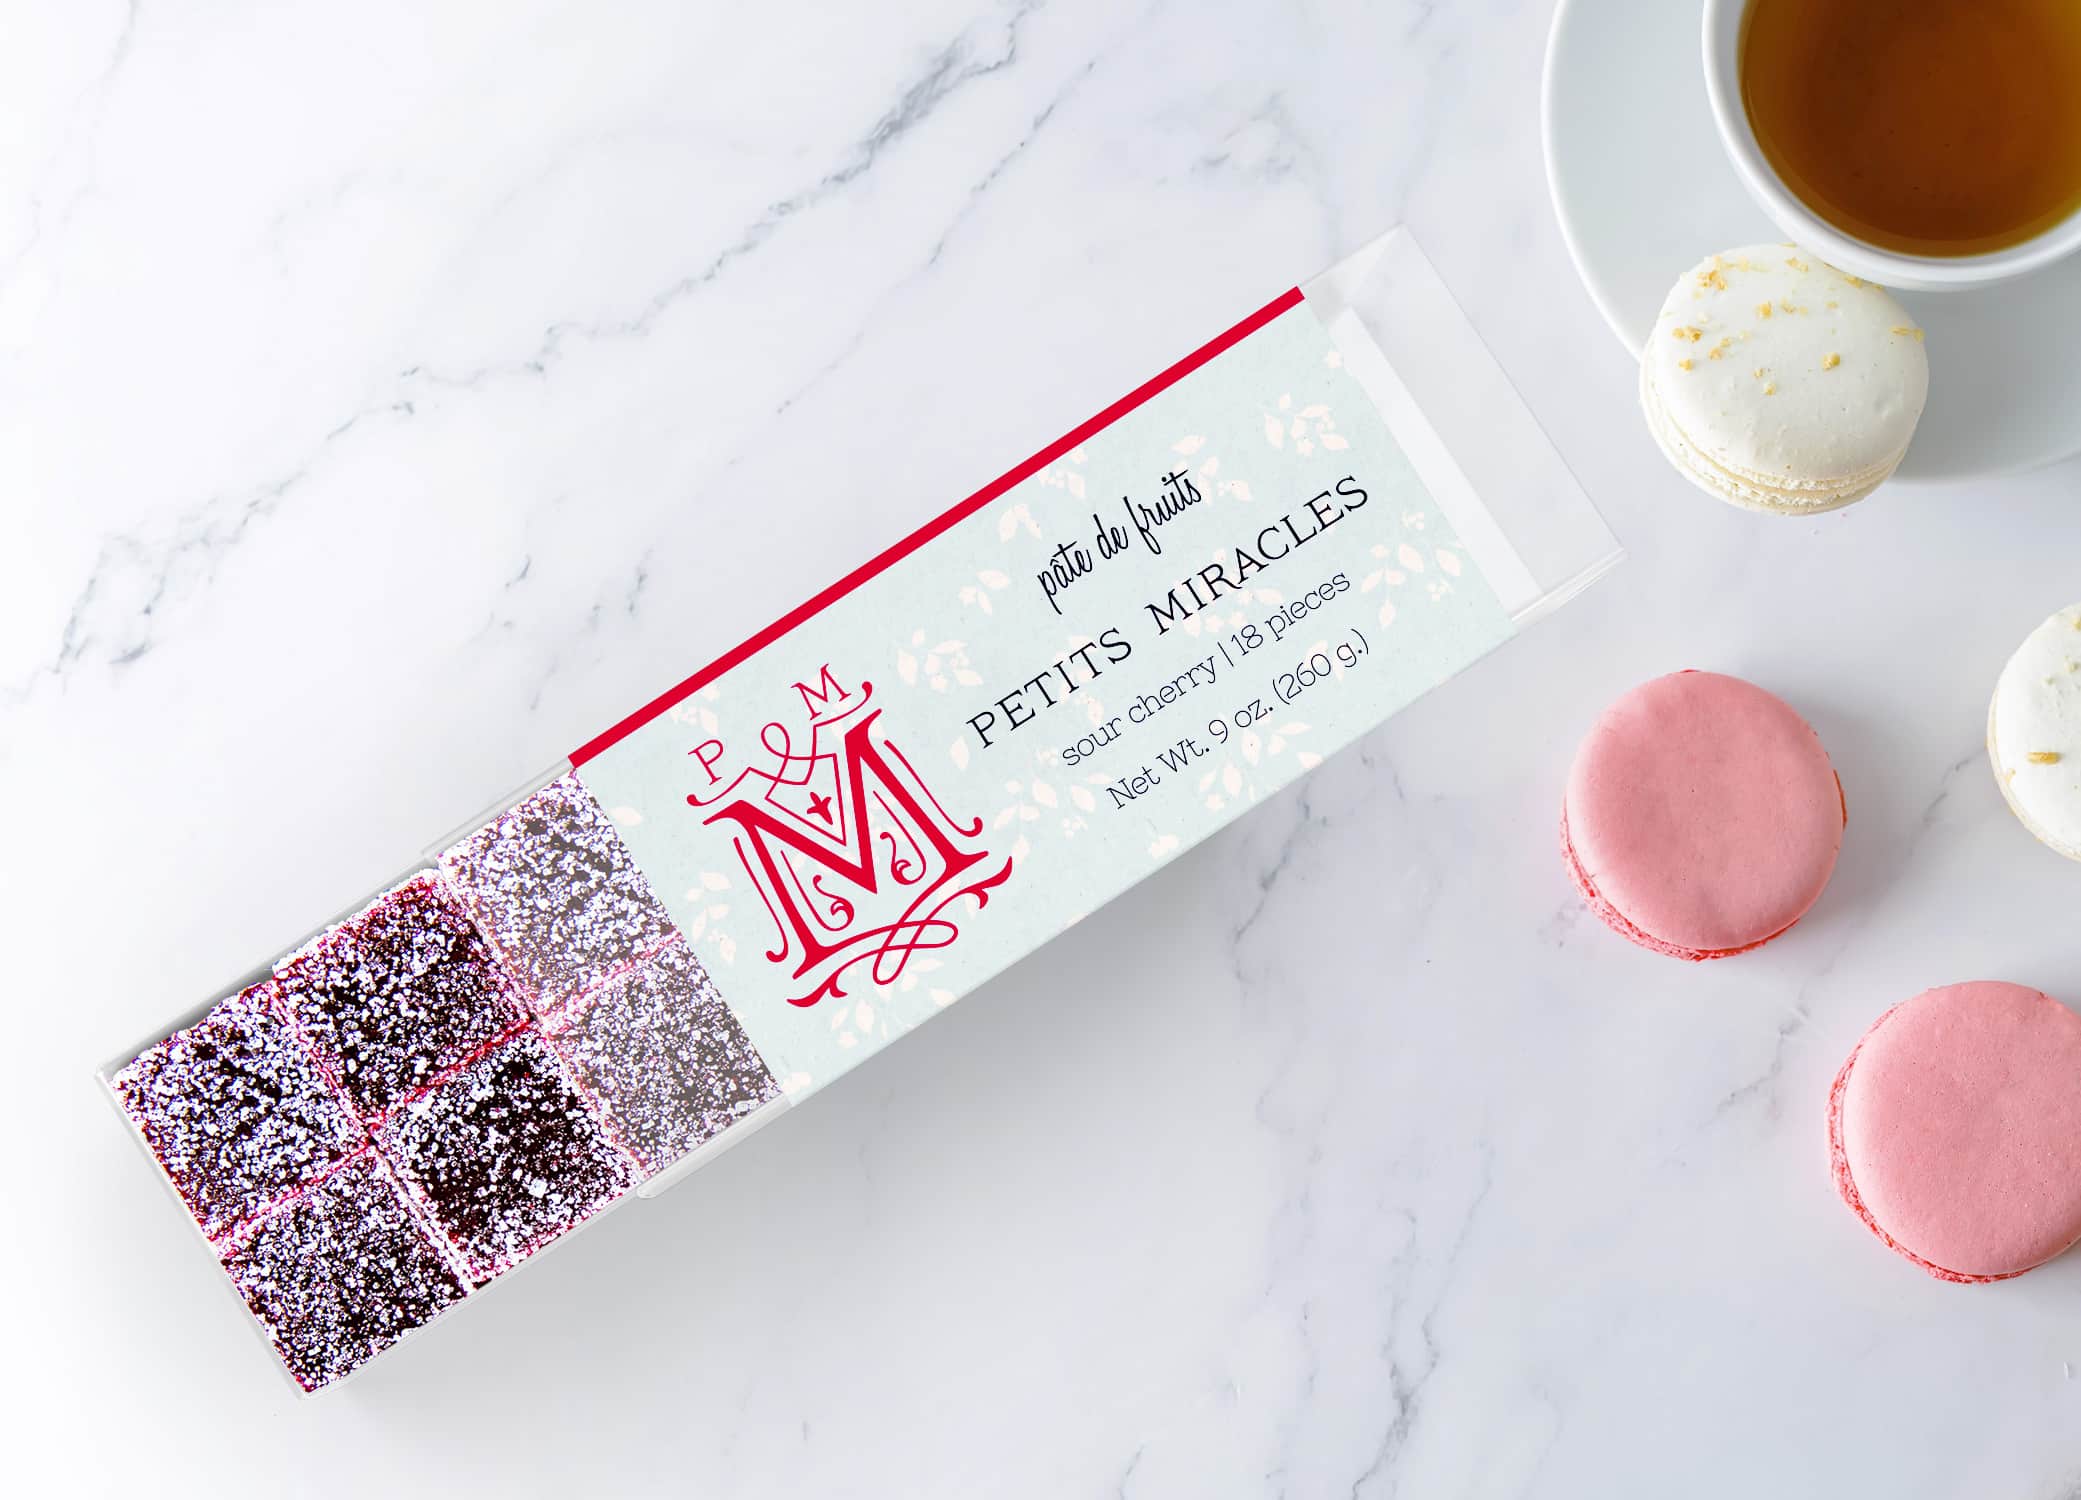 Petits Miracles Pate de Fruits packaging design with bright pink bands along the edges of the box and swirls around "M" icon next to type against a marble background with tea and macarons.